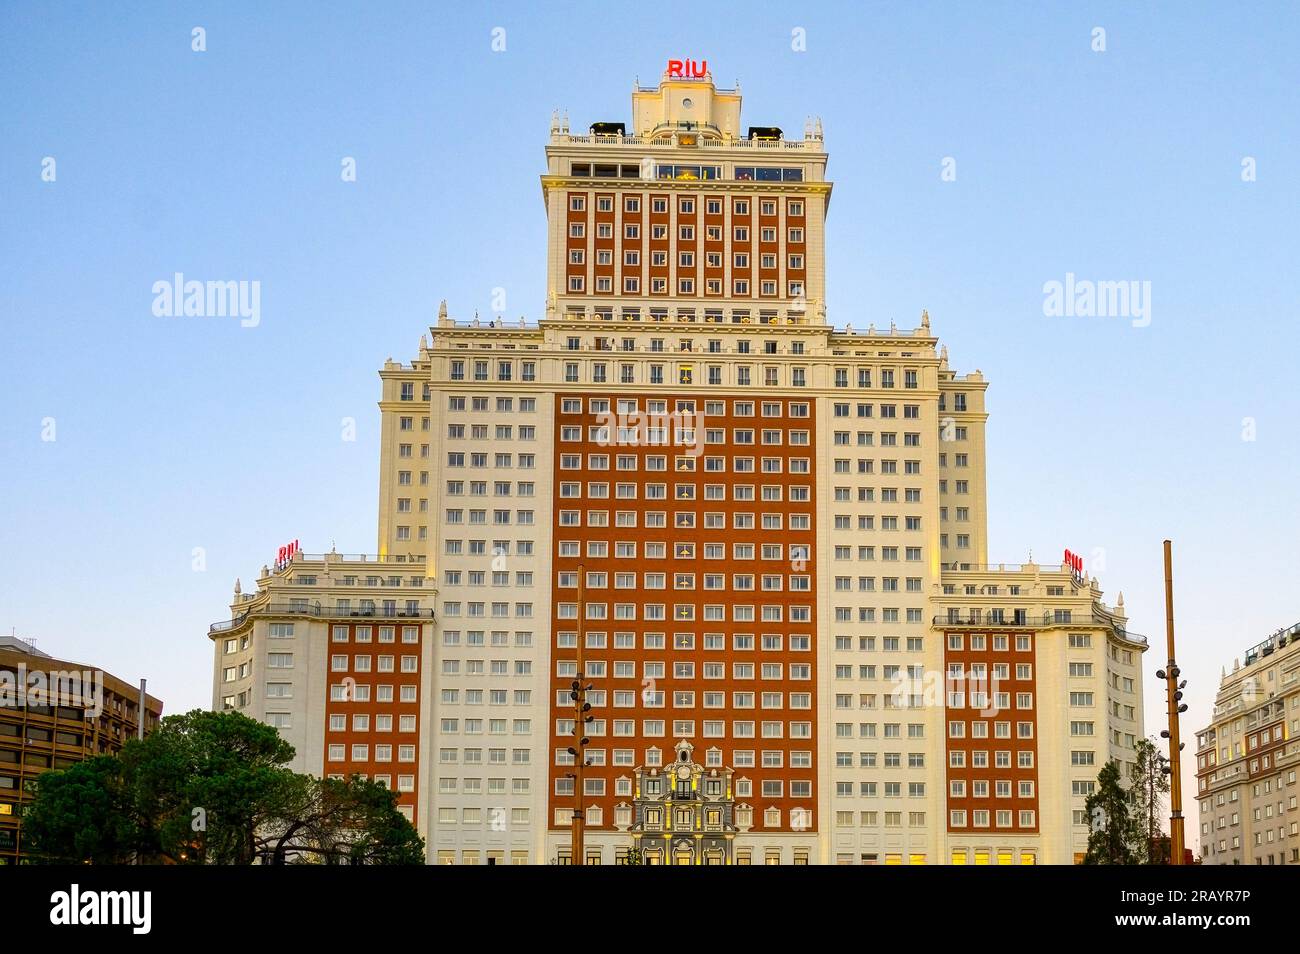 Madrid, Spain - July 19, 2022: The hotel Riu building. The structure features a modern architectural design with multiple floors and windows. Stock Photo